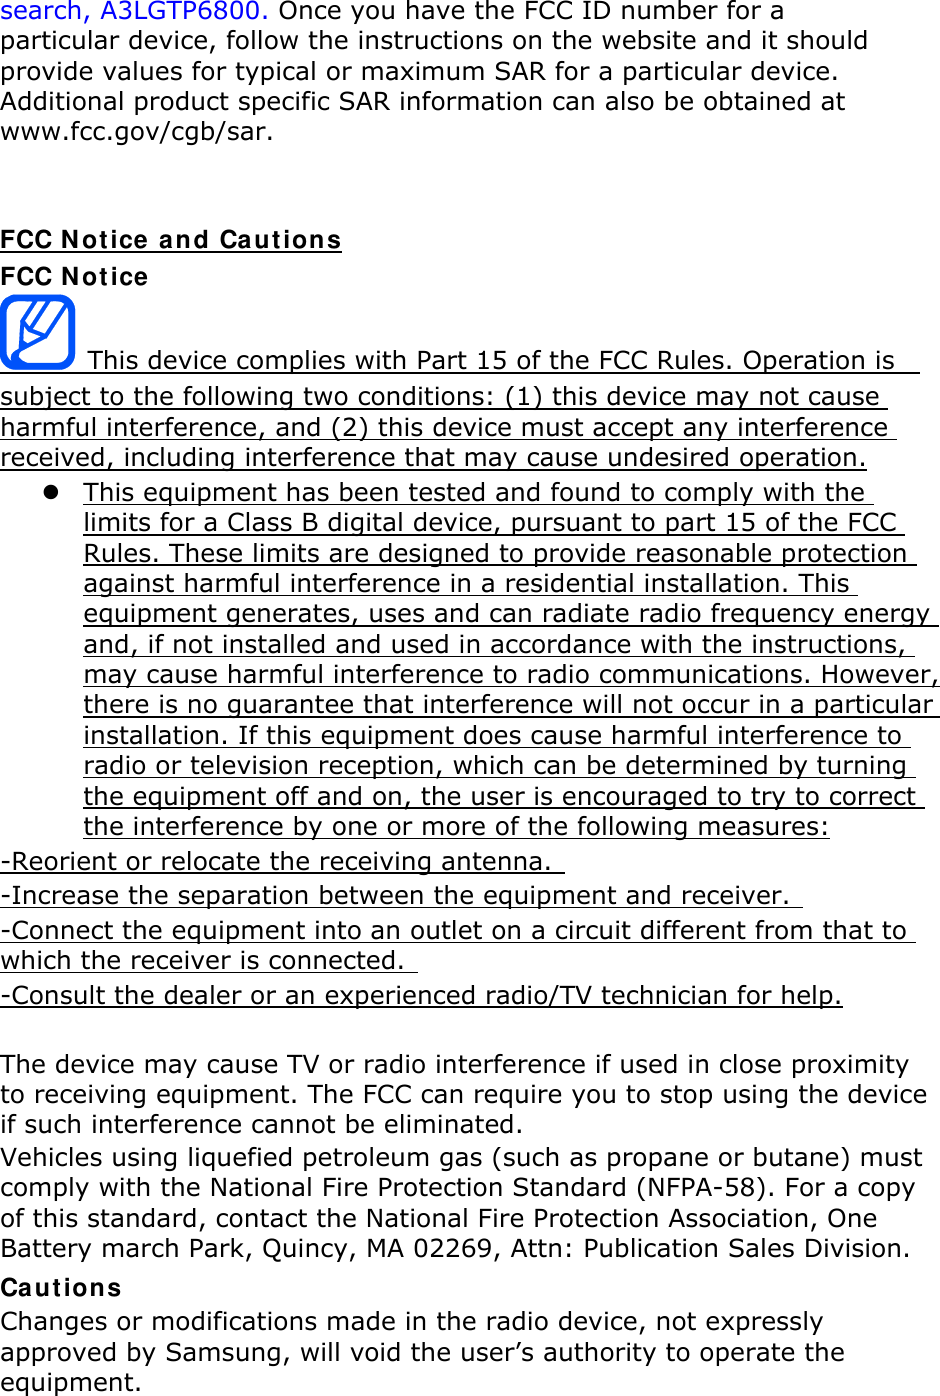 search, A3LGTP6800. Once you have the FCC ID number for a particular device, follow the instructions on the website and it should provide values for typical or maximum SAR for a particular device. Additional product specific SAR information can also be obtained at www.fcc.gov/cgb/sar.   FCC Not ice a nd Caut ions FCC Not ice  This device complies with Part 15 of the FCC Rules. Operation is   subject to the following two conditions: (1) this device may not cause harmful interference, and (2) this device must accept any interference received, including interference that may cause undesired operation. z This equipment has been tested and found to comply with the limits for a Class B digital device, pursuant to part 15 of the FCC Rules. These limits are designed to provide reasonable protection against harmful interference in a residential installation. This equipment generates, uses and can radiate radio frequency energy and, if not installed and used in accordance with the instructions, may cause harmful interference to radio communications. However, there is no guarantee that interference will not occur in a particular installation. If this equipment does cause harmful interference to radio or television reception, which can be determined by turning the equipment off and on, the user is encouraged to try to correct the interference by one or more of the following measures: -Reorient or relocate the receiving antenna.   -Increase the separation between the equipment and receiver.  -Connect the equipment into an outlet on a circuit different from that to which the receiver is connected.   -Consult the dealer or an experienced radio/TV technician for help.  The device may cause TV or radio interference if used in close proximity to receiving equipment. The FCC can require you to stop using the device if such interference cannot be eliminated. Vehicles using liquefied petroleum gas (such as propane or butane) must comply with the National Fire Protection Standard (NFPA-58). For a copy of this standard, contact the National Fire Protection Association, One Battery march Park, Quincy, MA 02269, Attn: Publication Sales Division. Ca ut ions Changes or modifications made in the radio device, not expressly approved by Samsung, will void the user’s authority to operate the equipment. 